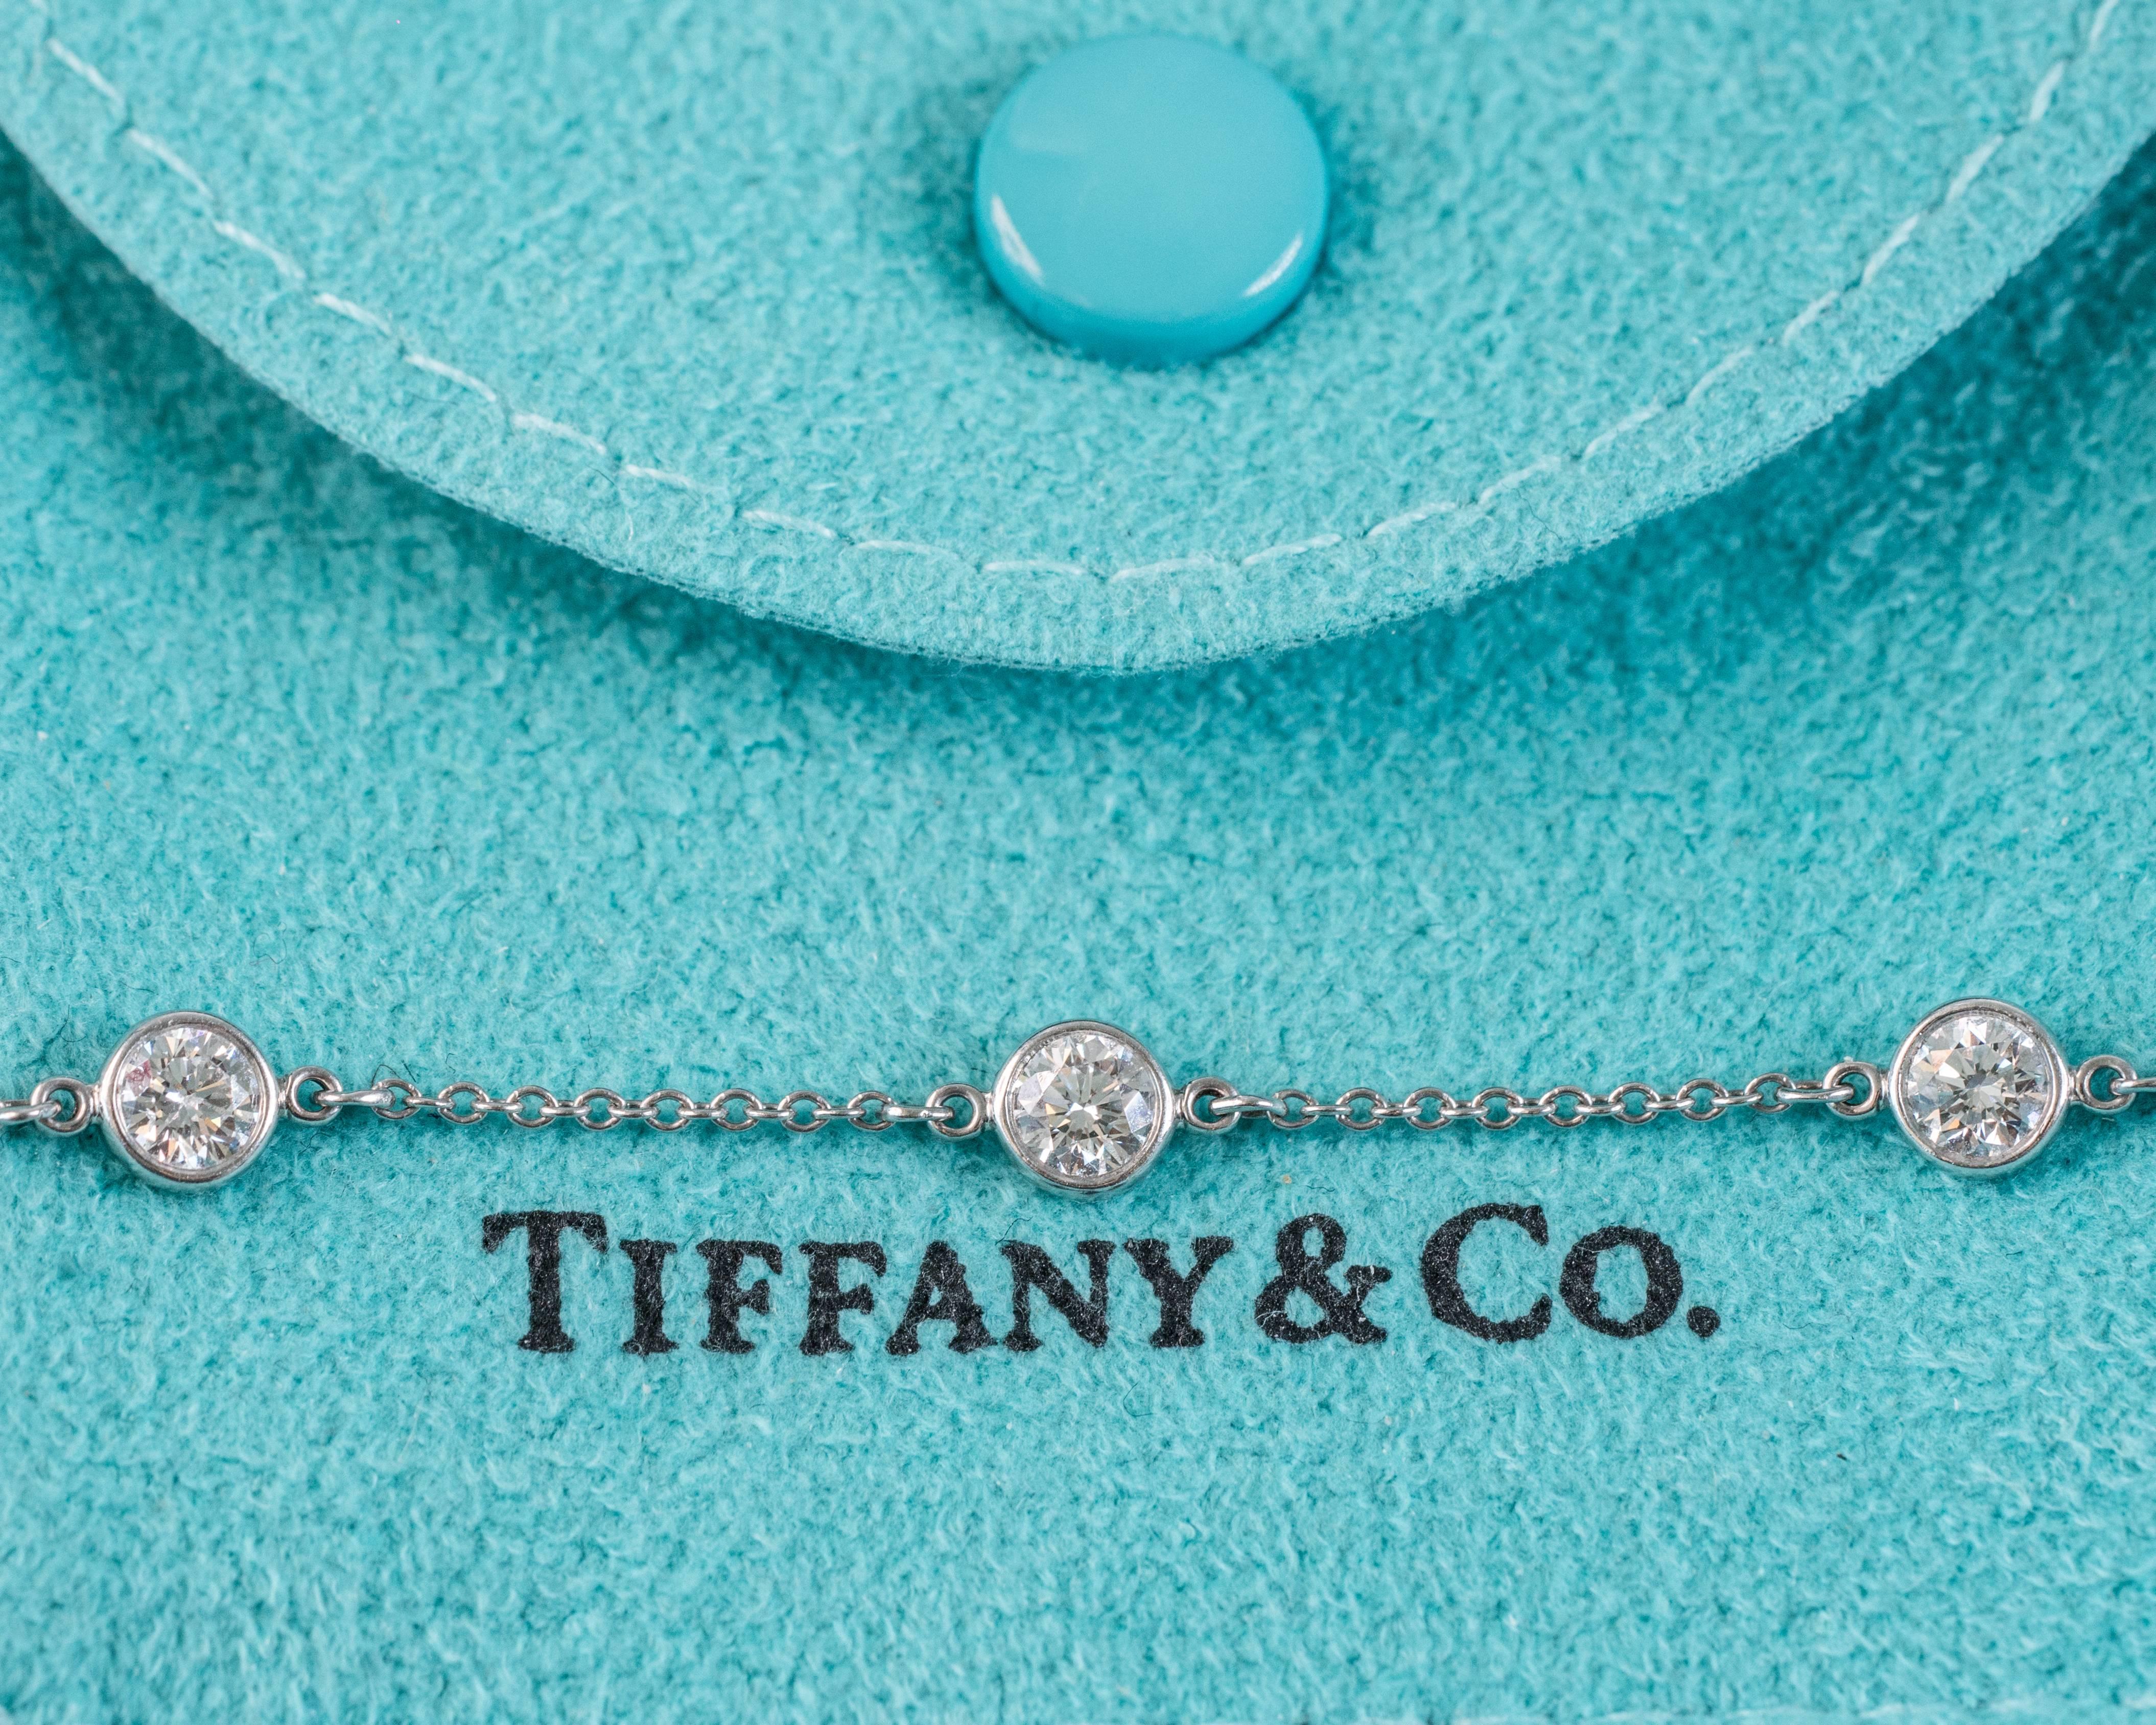 This Stunning Platinum and Diamond Tiffany and Co Elsa Peretti Diamonds by the Yard bracelet features 7 round brilliant diamonds bezel set in timeless platinum. The bracelet measures 7 inches long and comes with the Tiffany and Co. pouch and box.